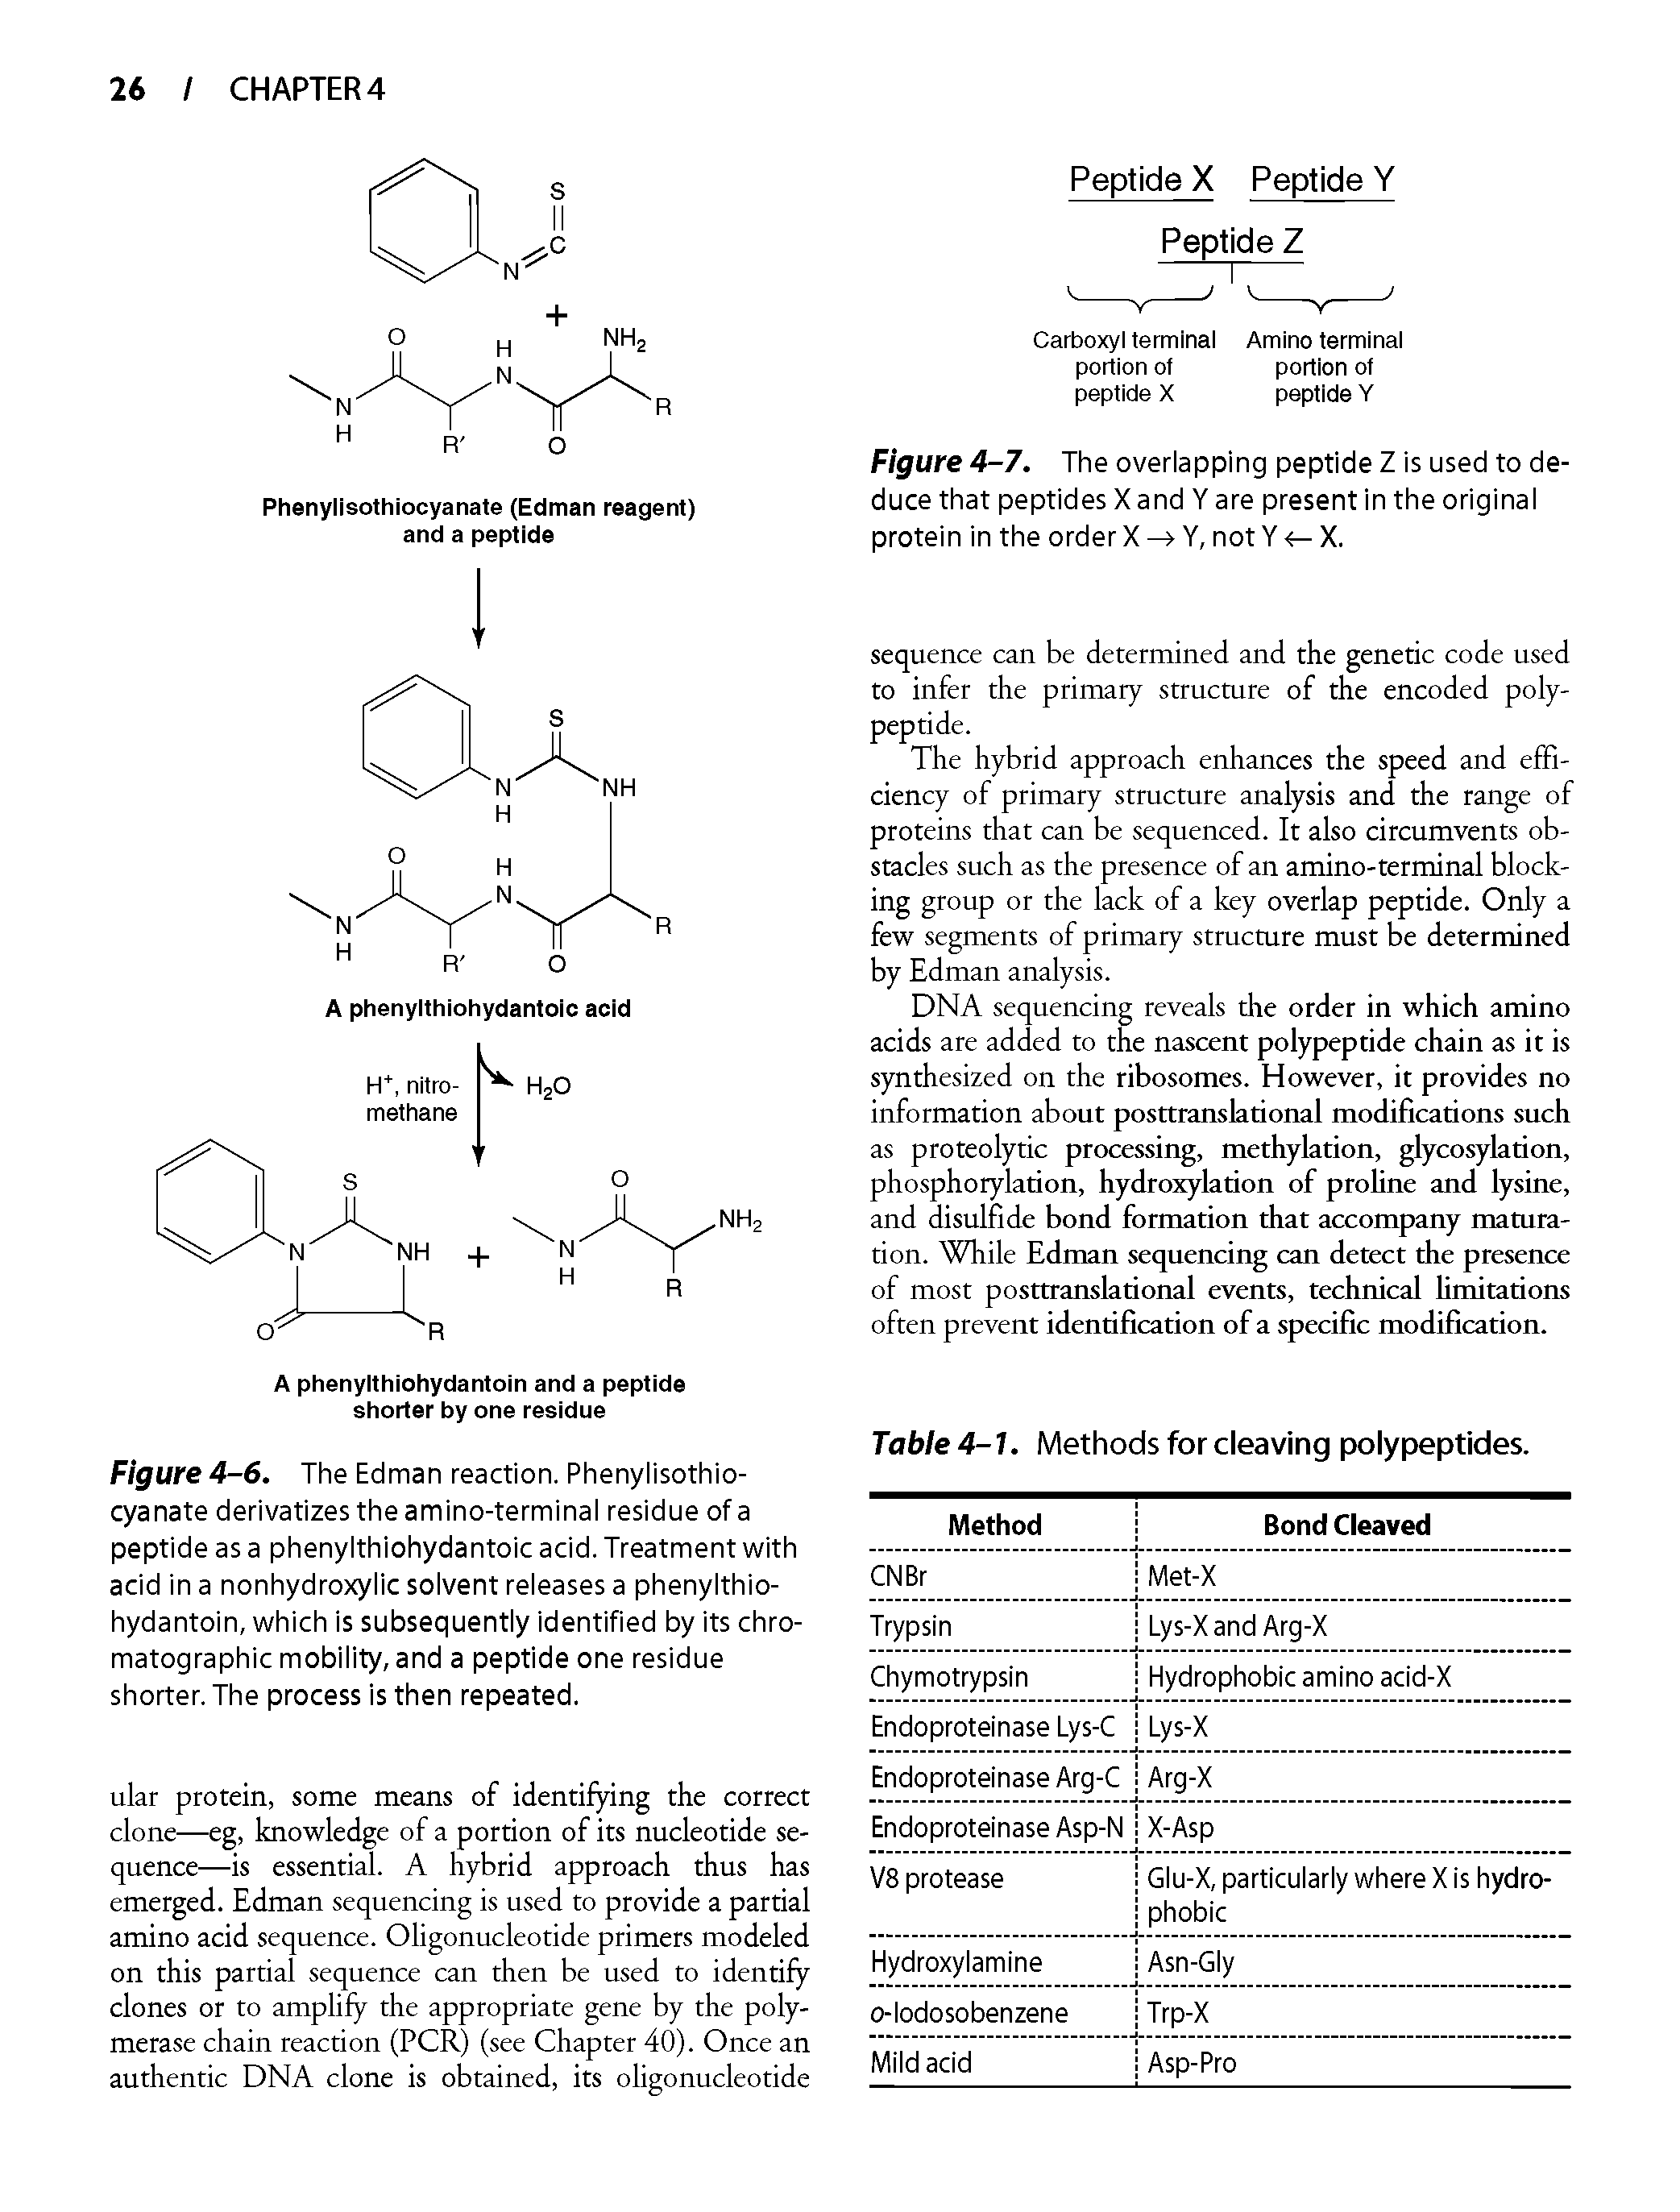 Figure 4-6. The Edman reaction. Phenylisothiocyanate derivatizes the amino-terminal residue of a peptide as a phenylthiohydantoic acid. Treatment with acid in a nonhydroxylic solvent releases a phenyithiohydantoin, which is subsequently identified by its chromatographic mobility, and a peptide one residue shorter. The process is then repeated.